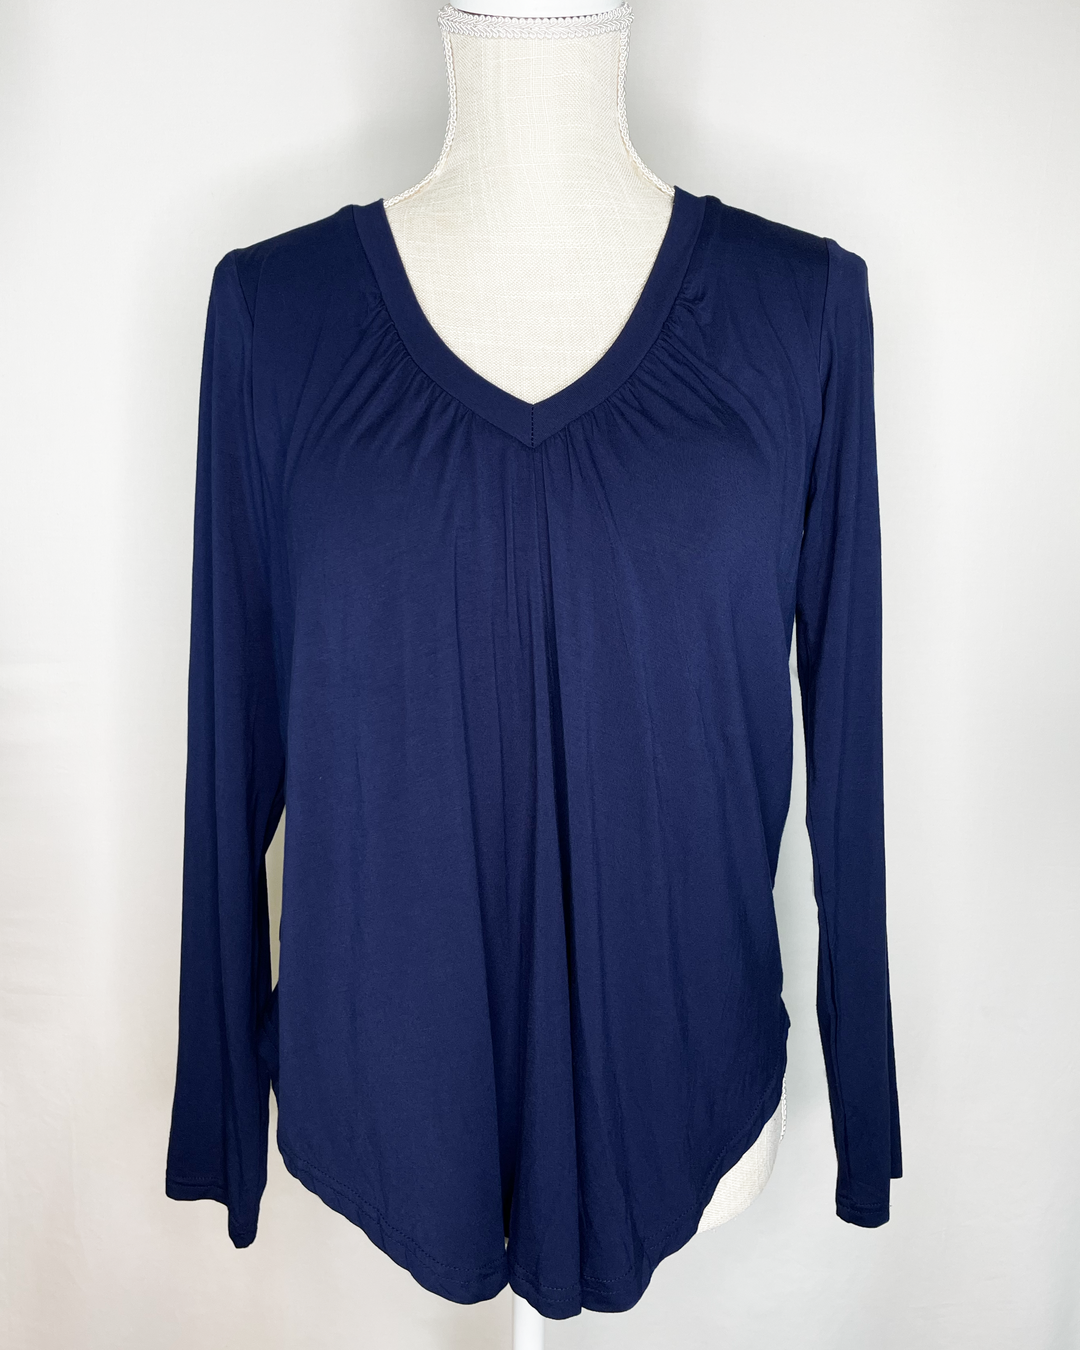 DARCI Gather-front Braless Bamboo Long-Sleeve Top in True Blue color - Front view